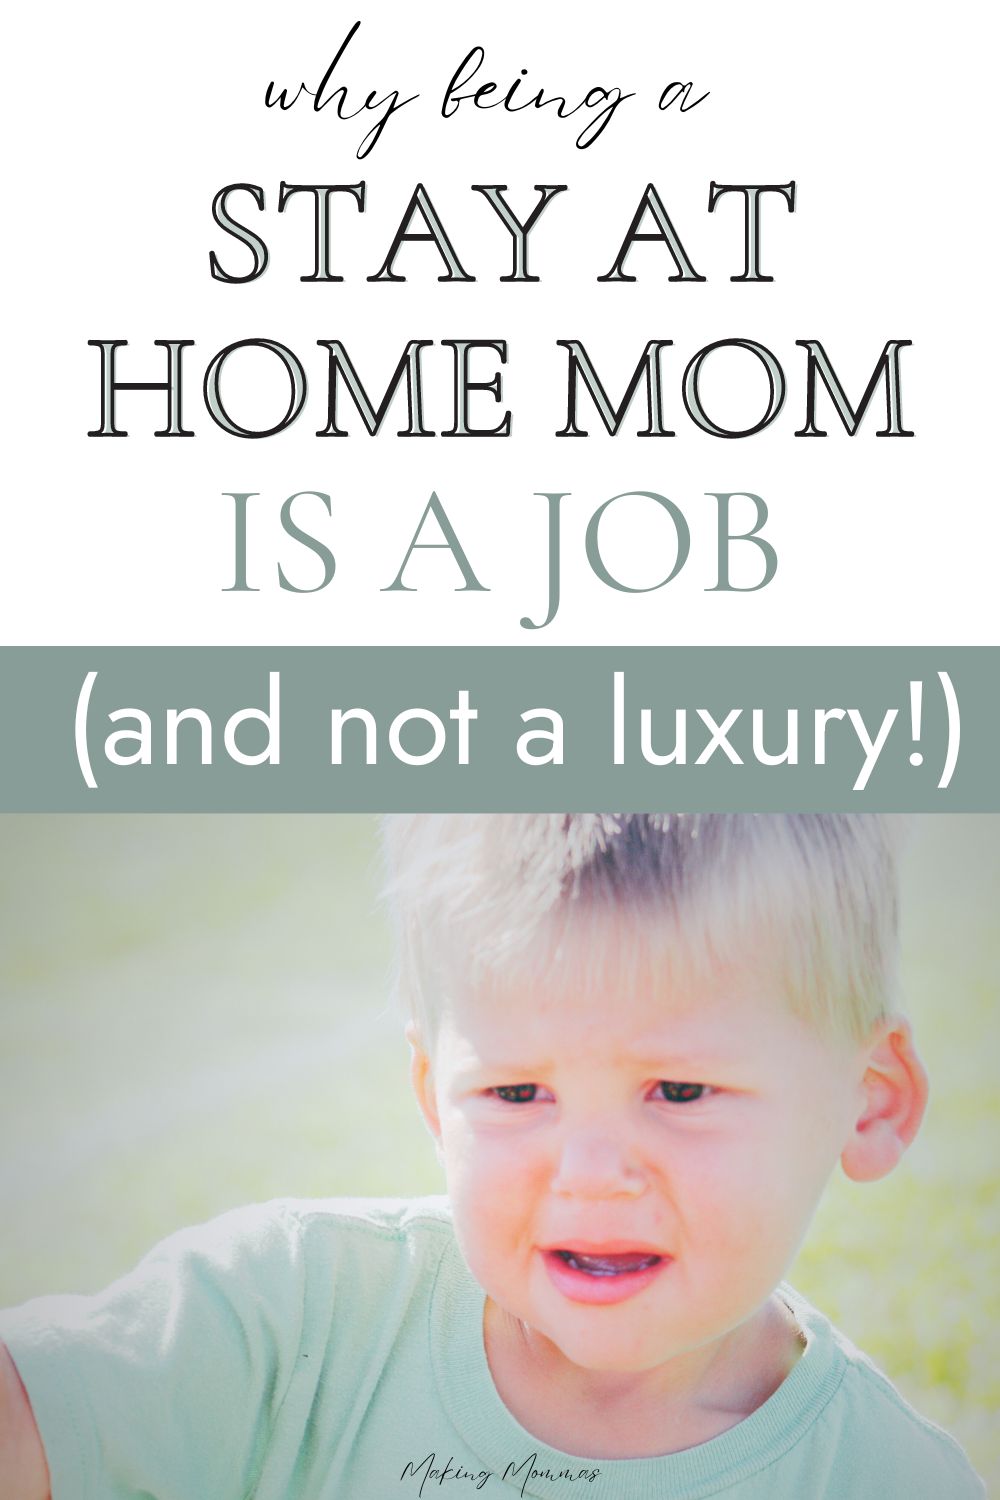 Pinterest pin image that reads, "why being a stay at home mom is a job (and not a luxury!) with an image of a sad little boy.